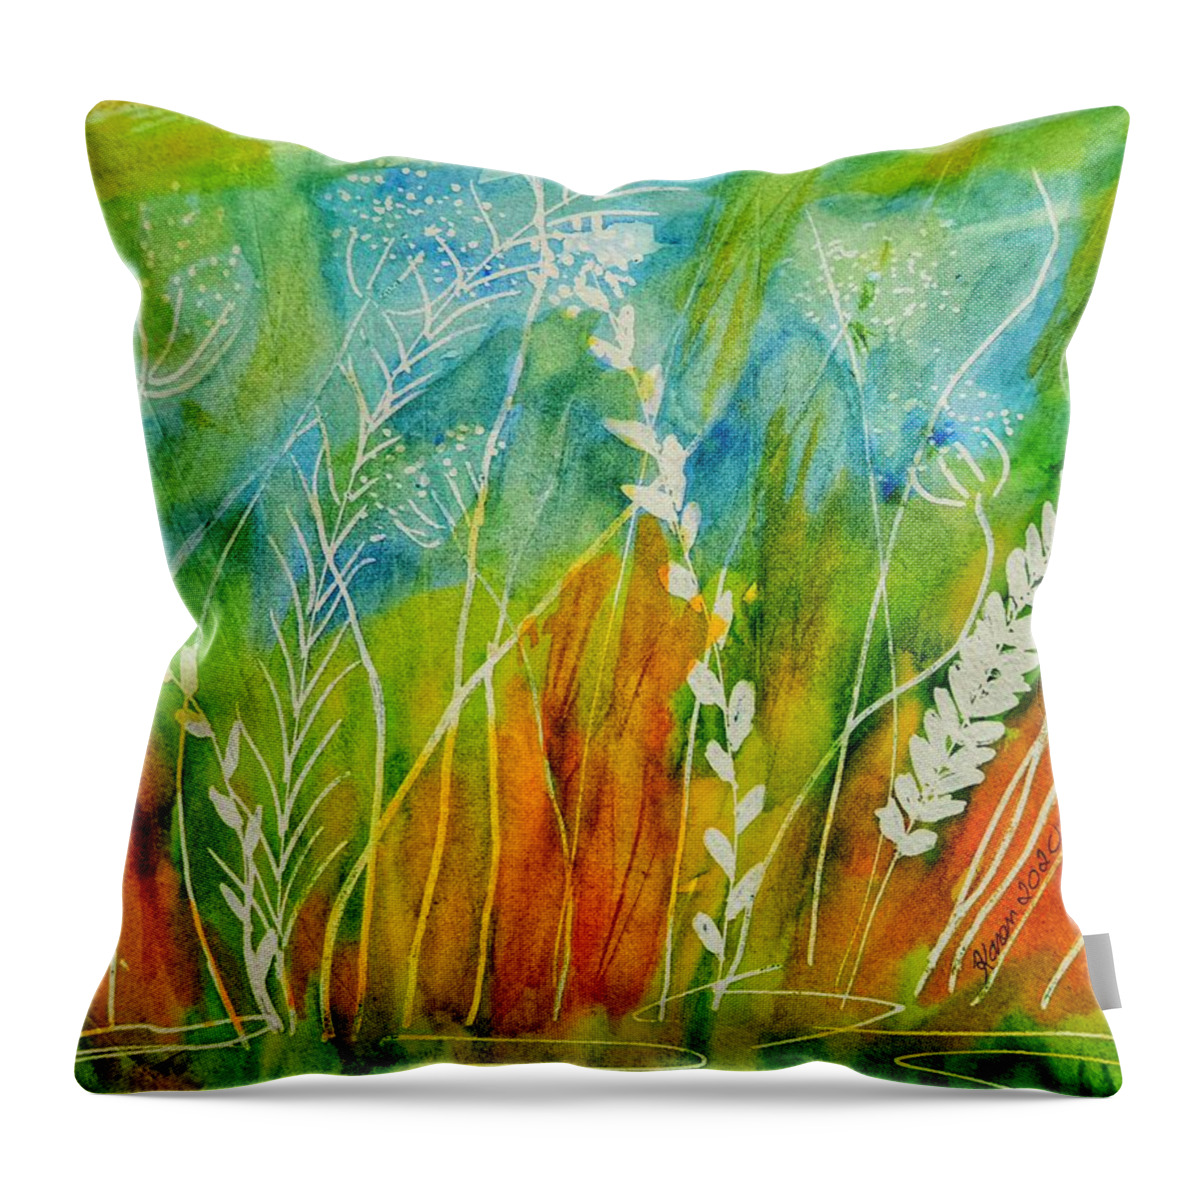 Grass Throw Pillow featuring the painting Eyelevel With Nature by Shady Lane Studios-Karen Howard